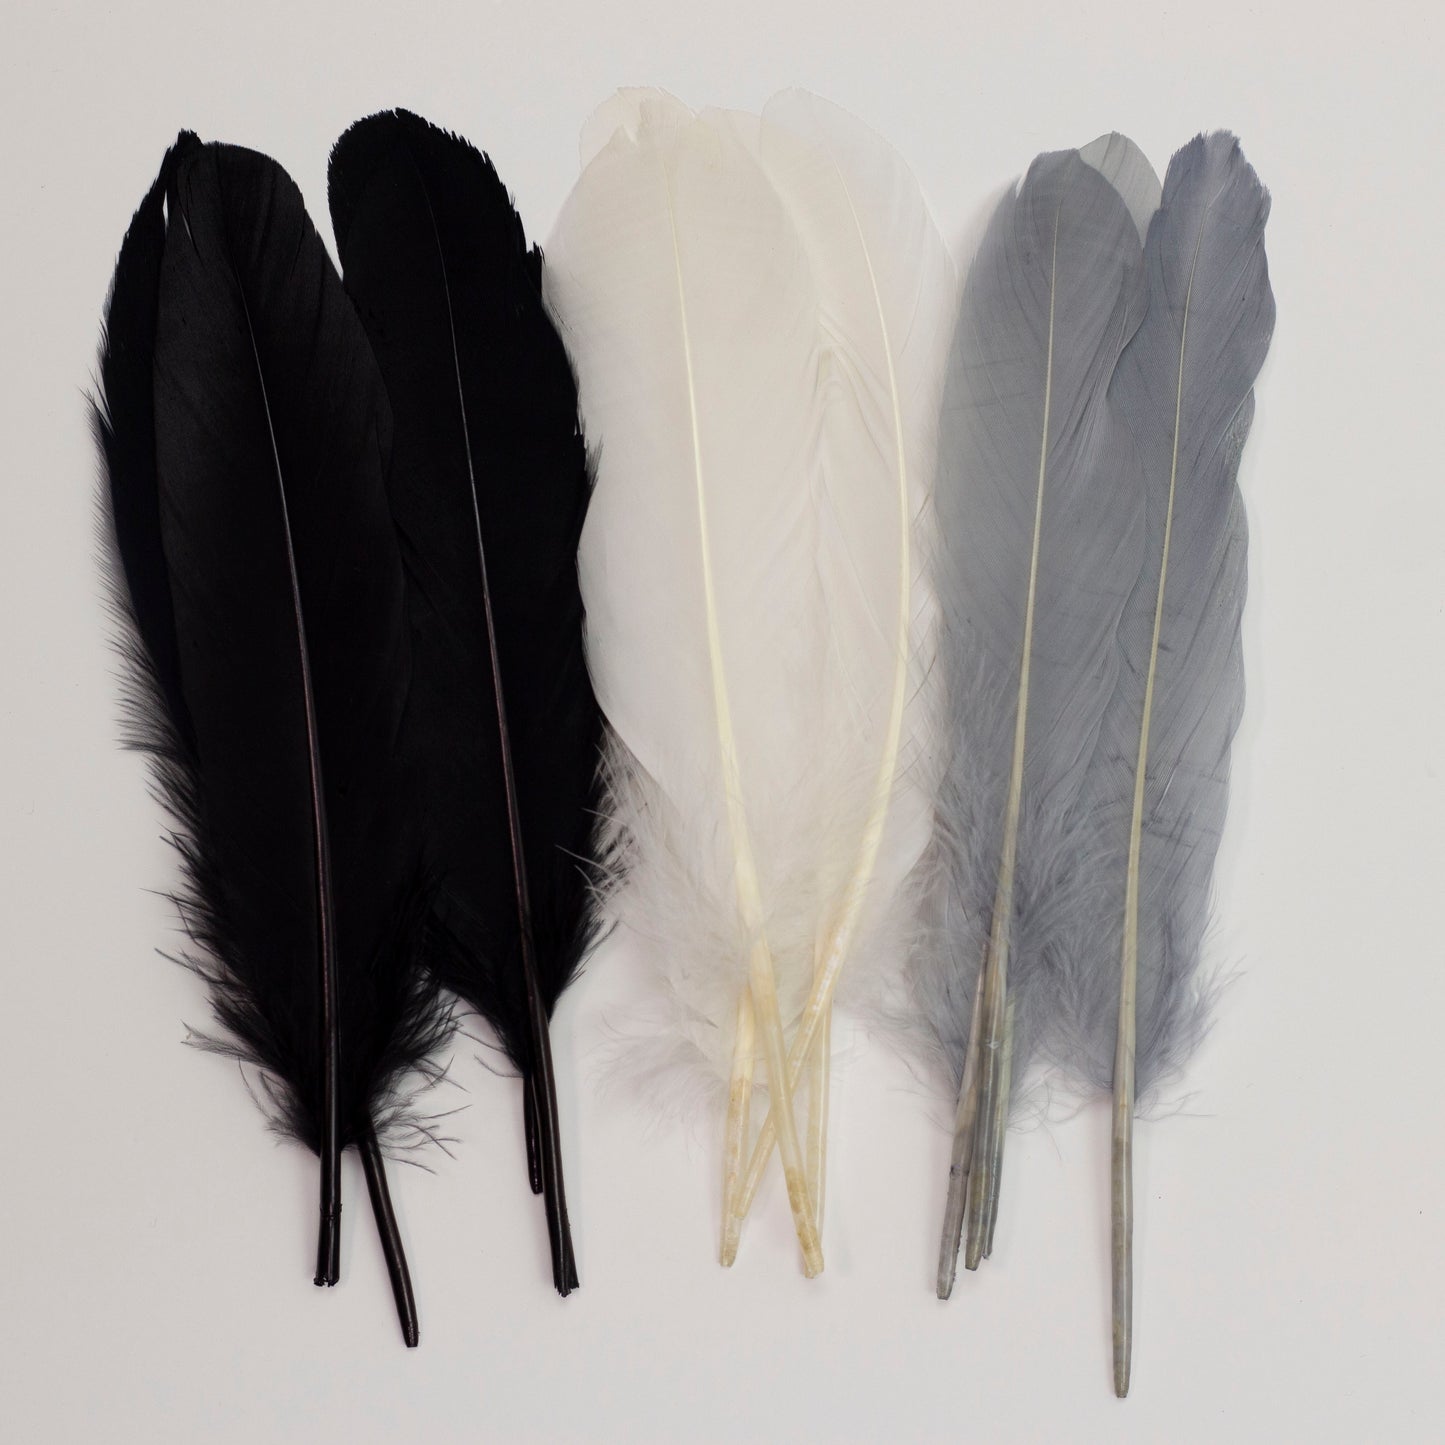 Goose Feathers 7-8" - 12 pcs - Black and White